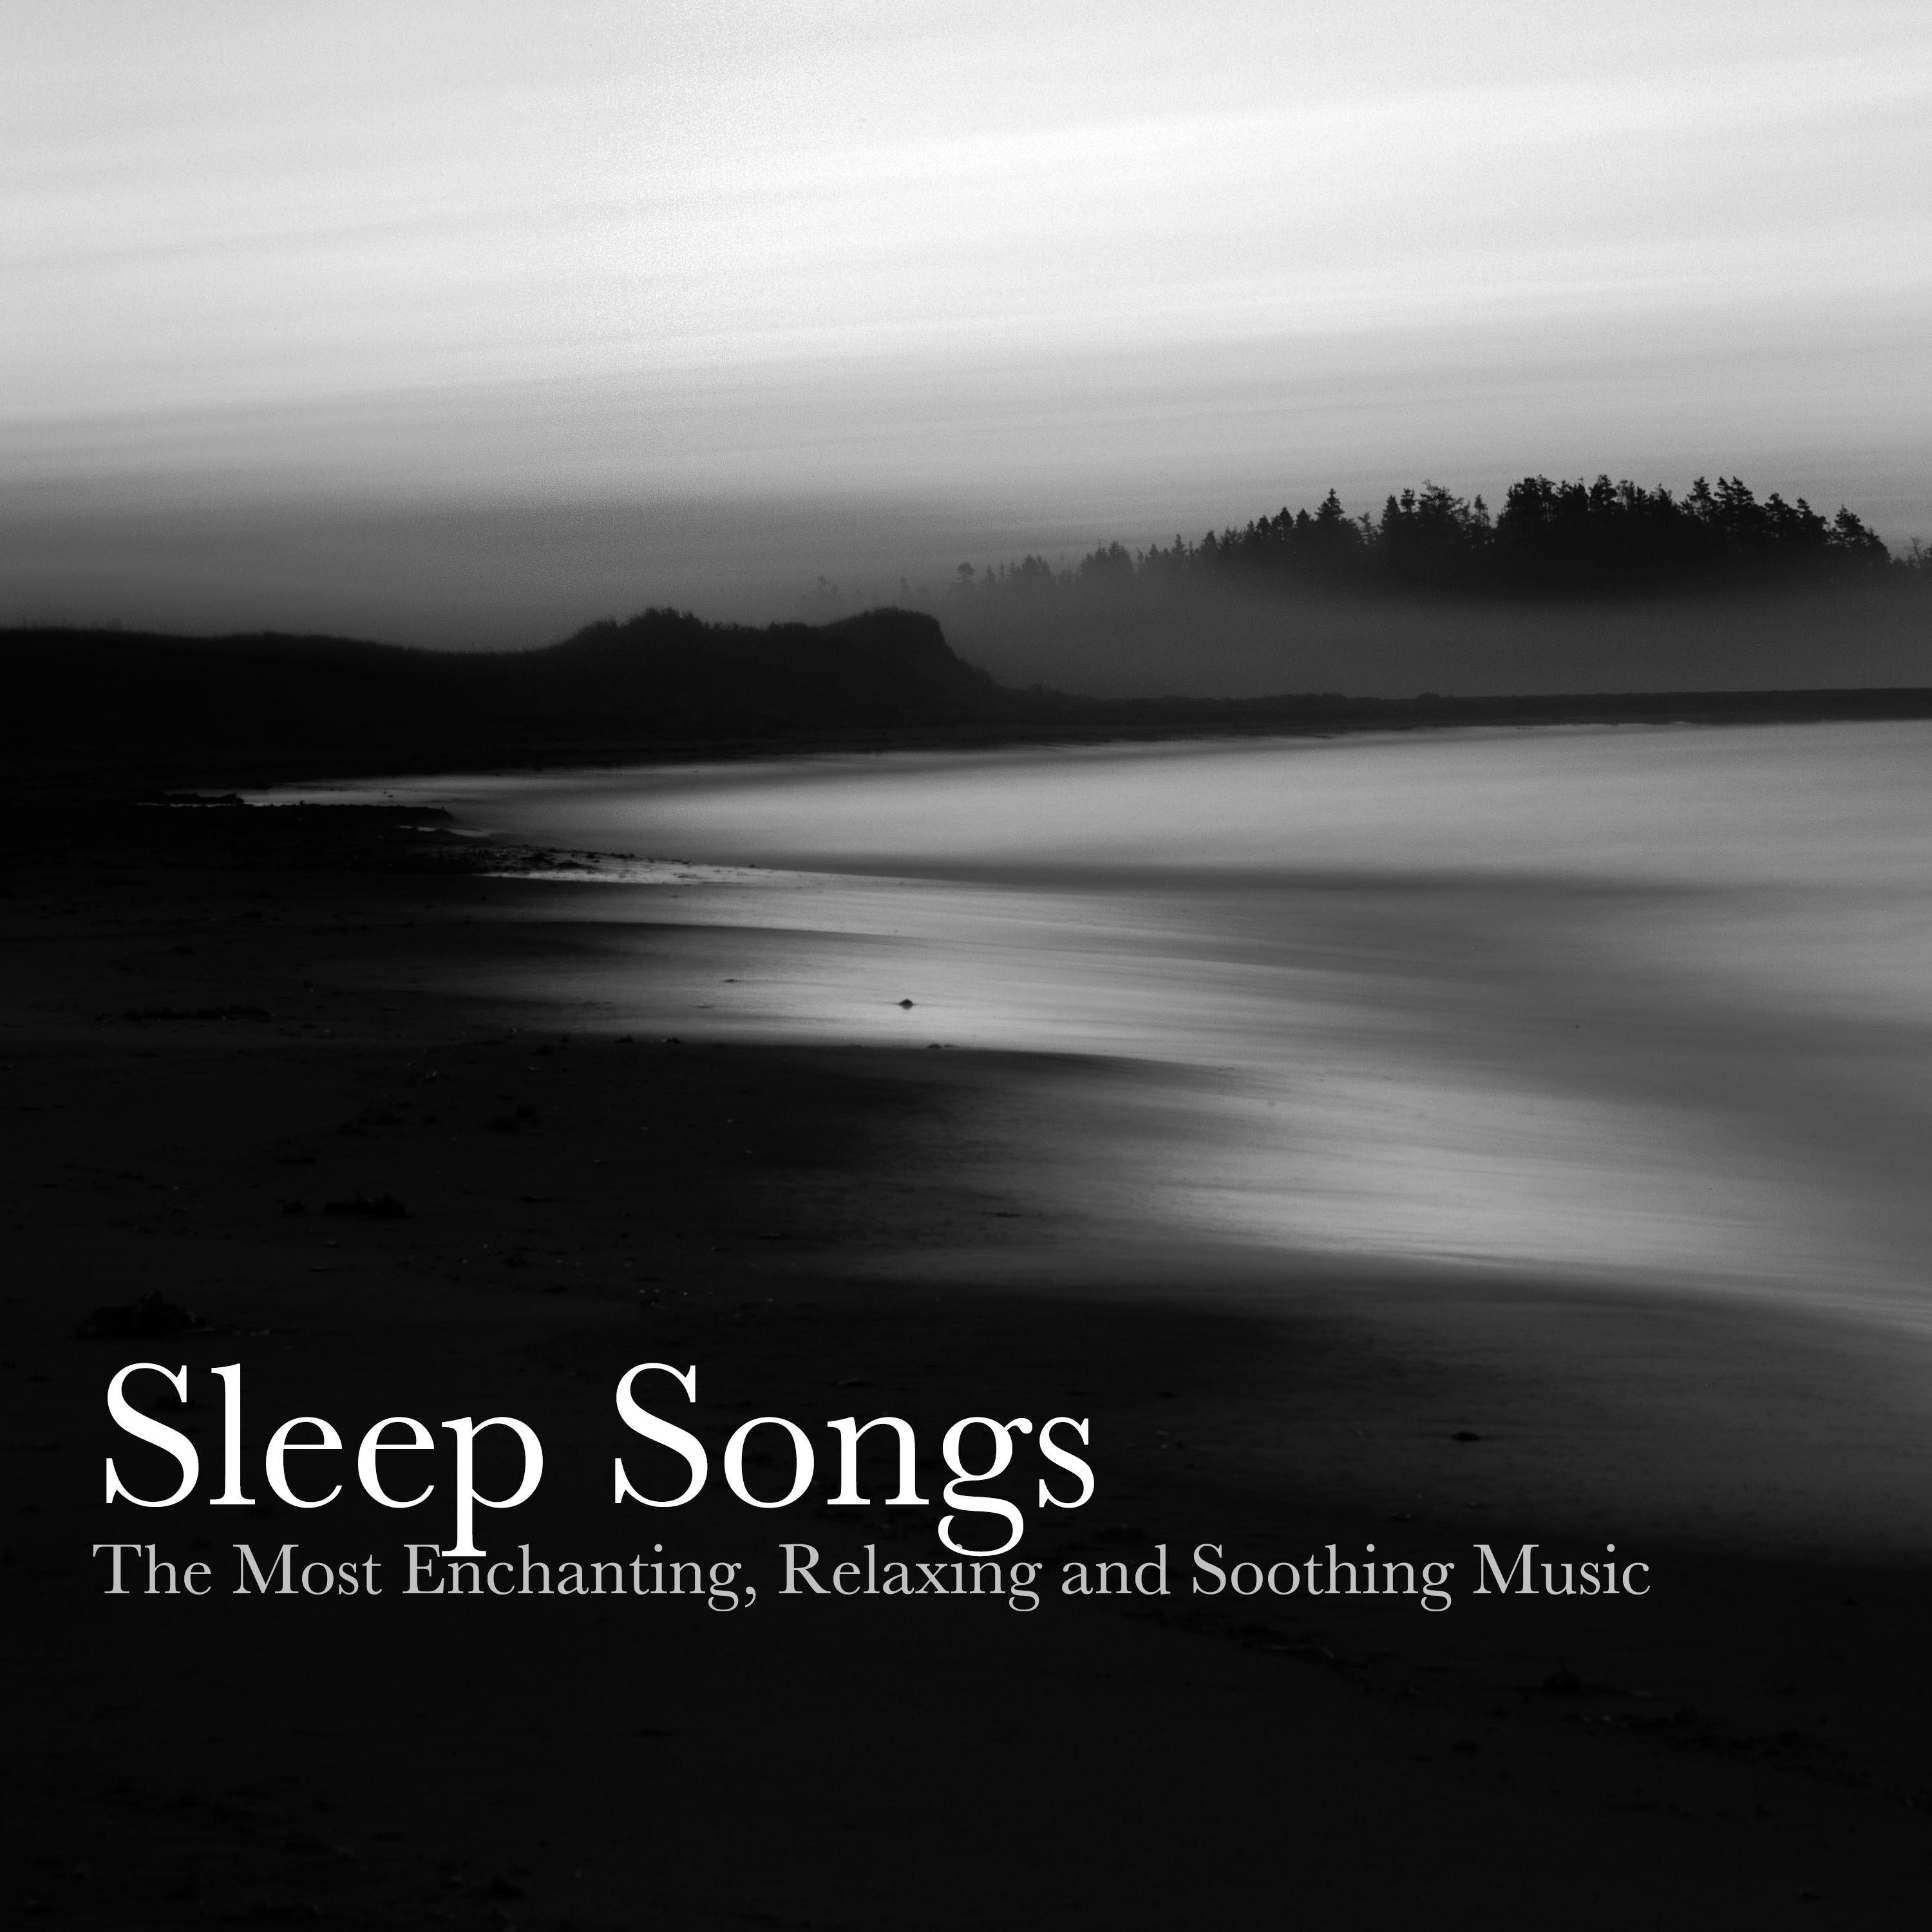 Sleep Songs - The Most Enchanting, Relaxing and Soothing Music to Help you Sleep at Night